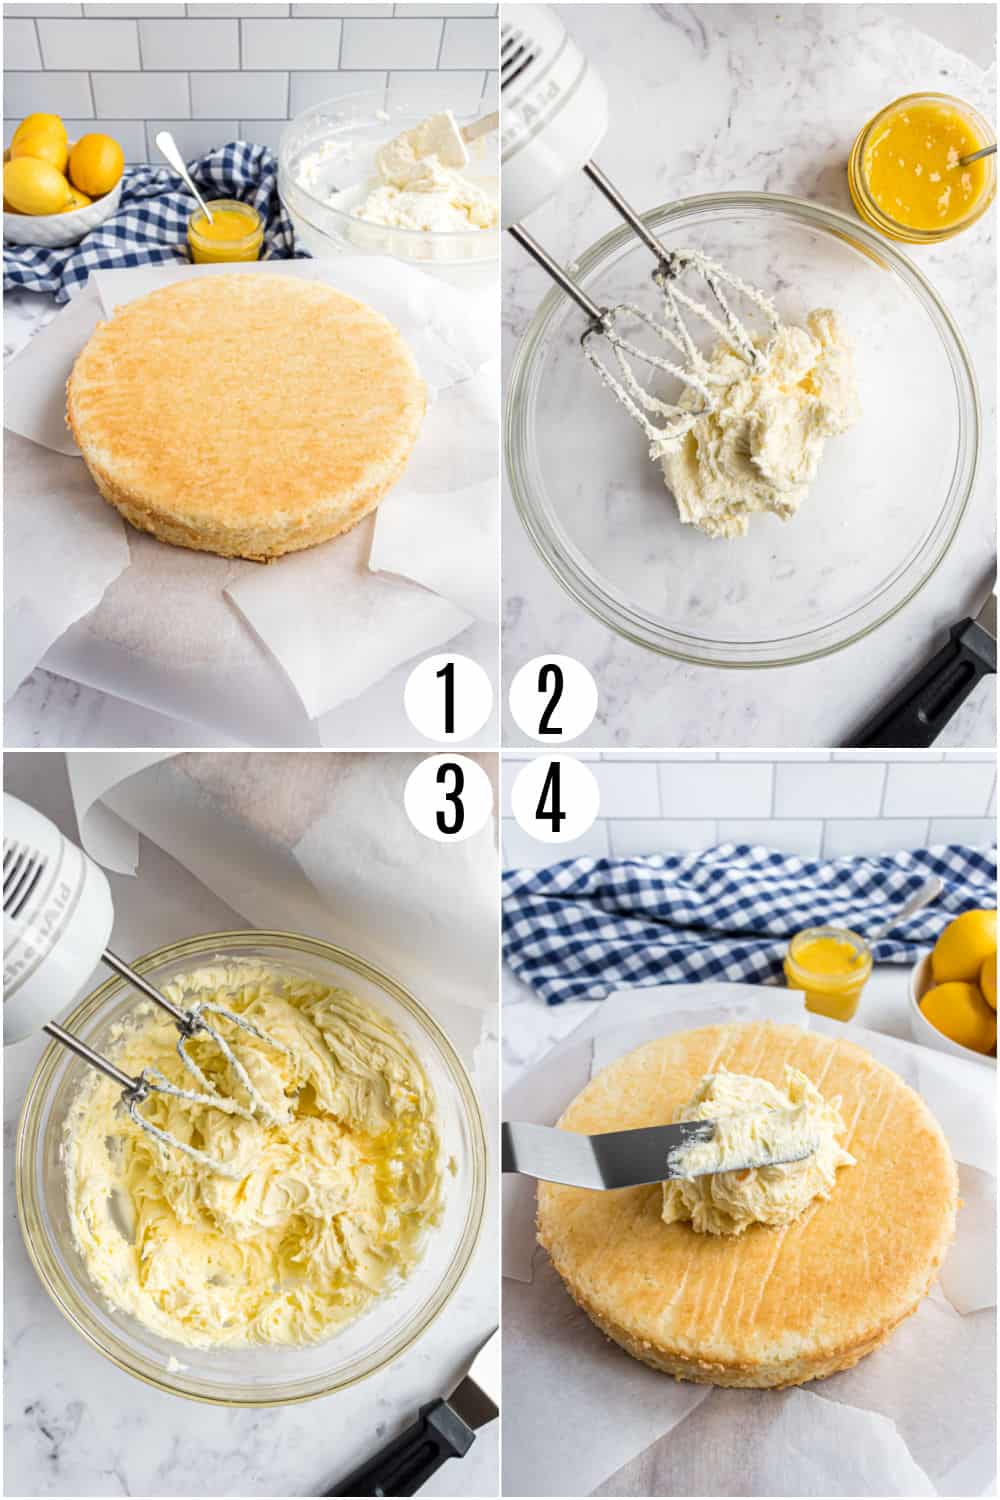 Step by step photos showing how to make lemon cake.